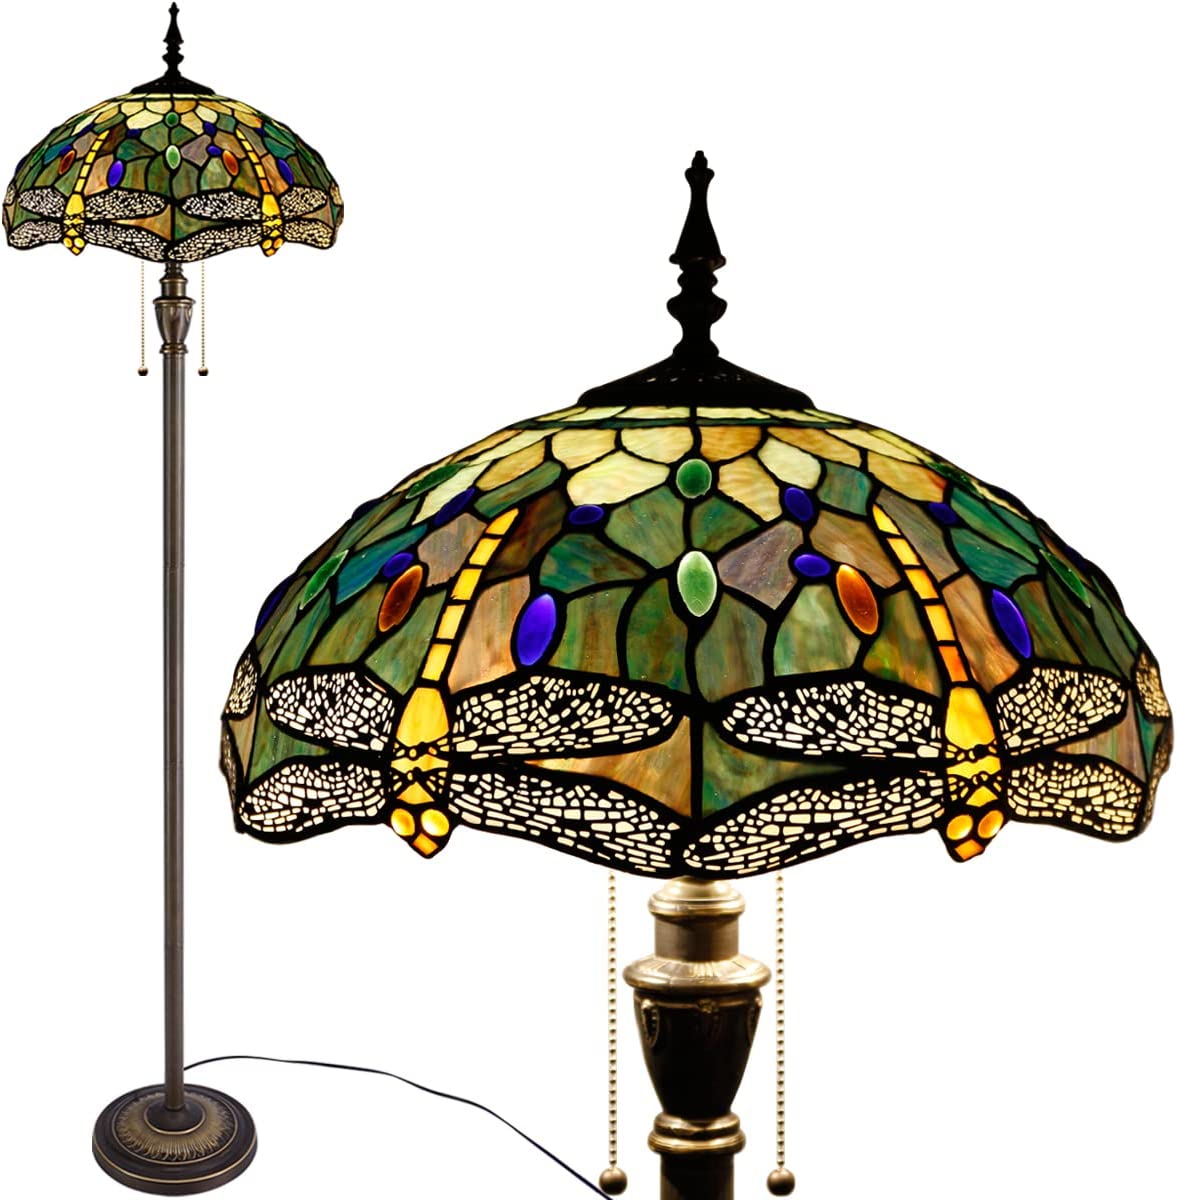 BBNBDMZ  Floor Lamp Stained Glass Butterfly Style Reading Lamp W16H70 Inch Tall Antique Standing Pole Light Bronze Finsh  Bright Lighting Decor  Corner Living Room Bedroom Office